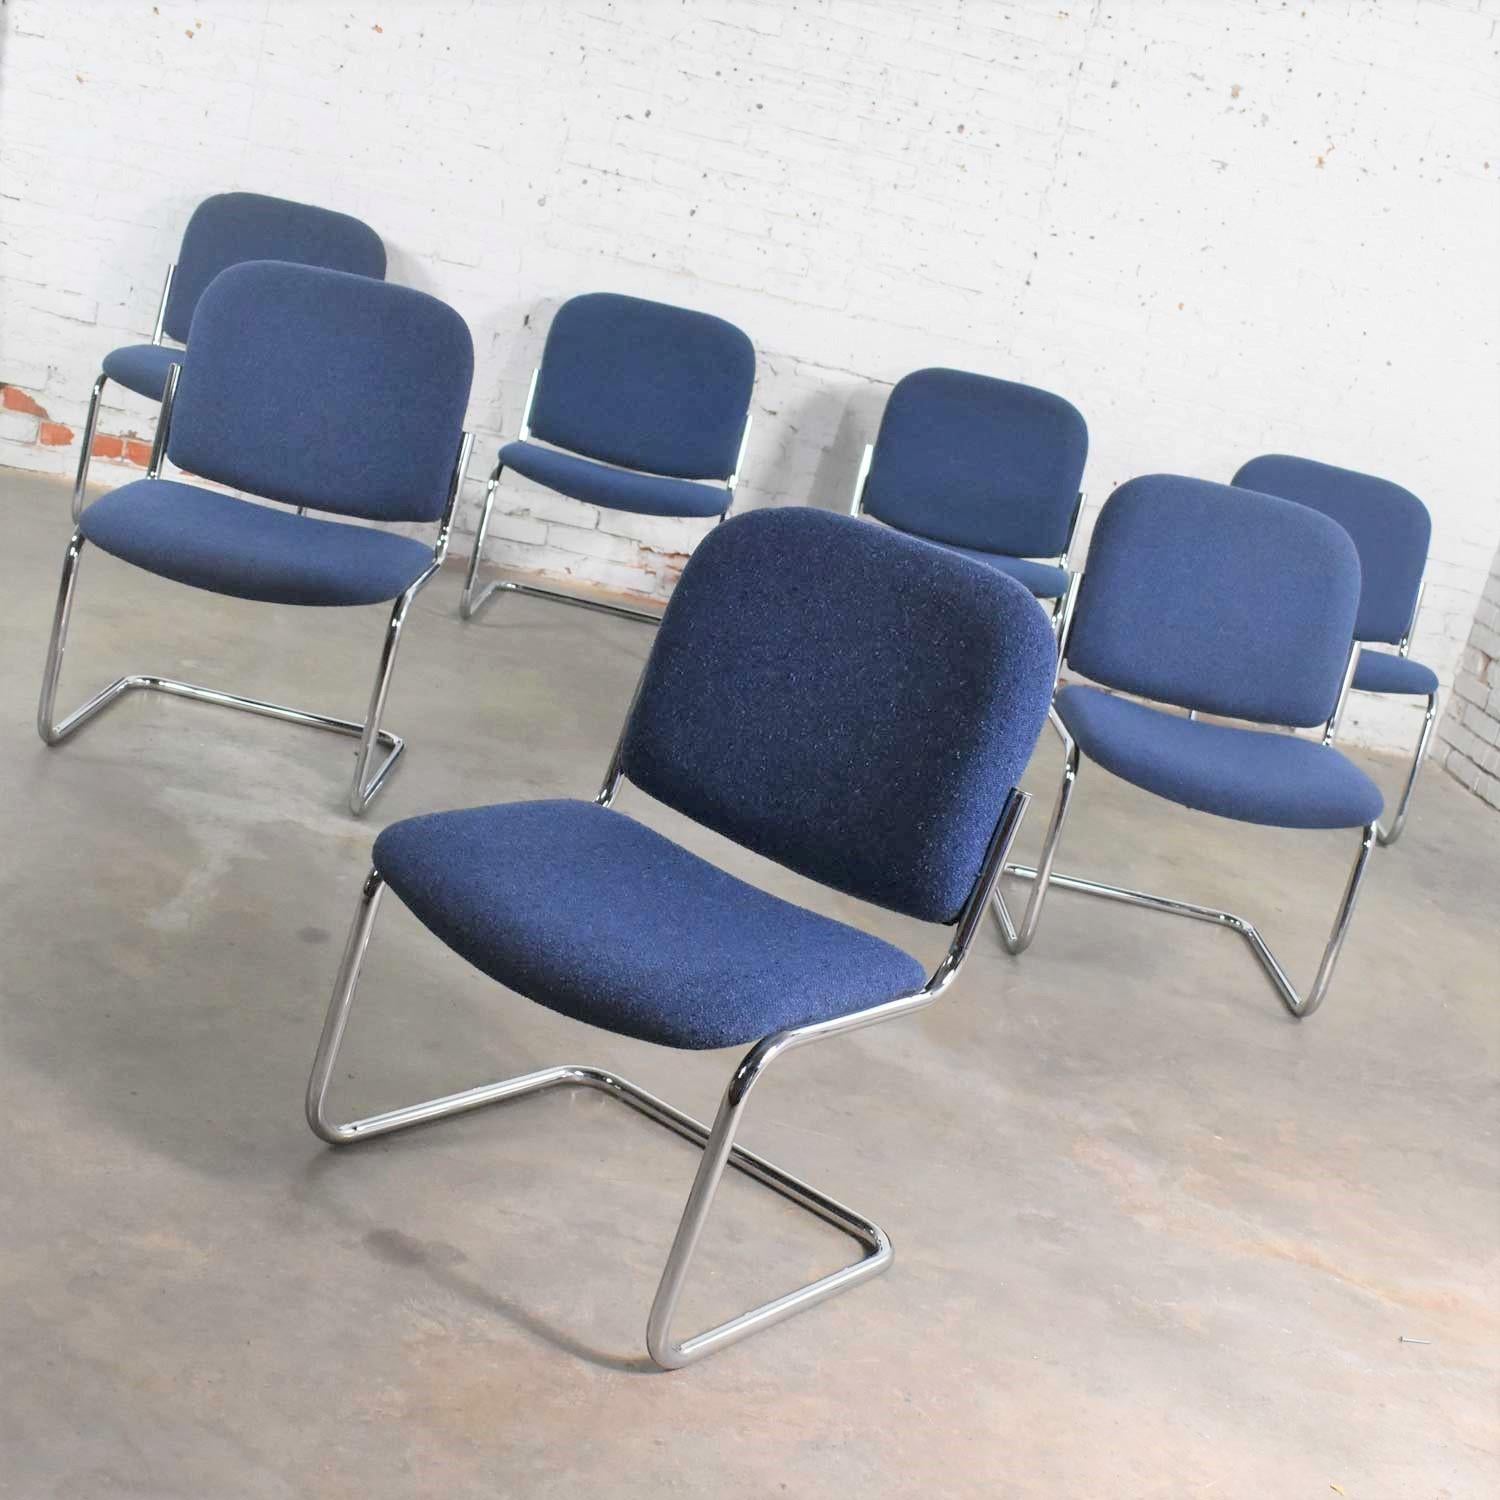 Awesome vintage cantilever tubular chrome and blue hopsack fabric upholstered lounge chairs in a slipper style without arms. They are in the manner of Thonet, the Cesca chair, and many other tubular chrome cantilevered chairs of the Bauhaus era.